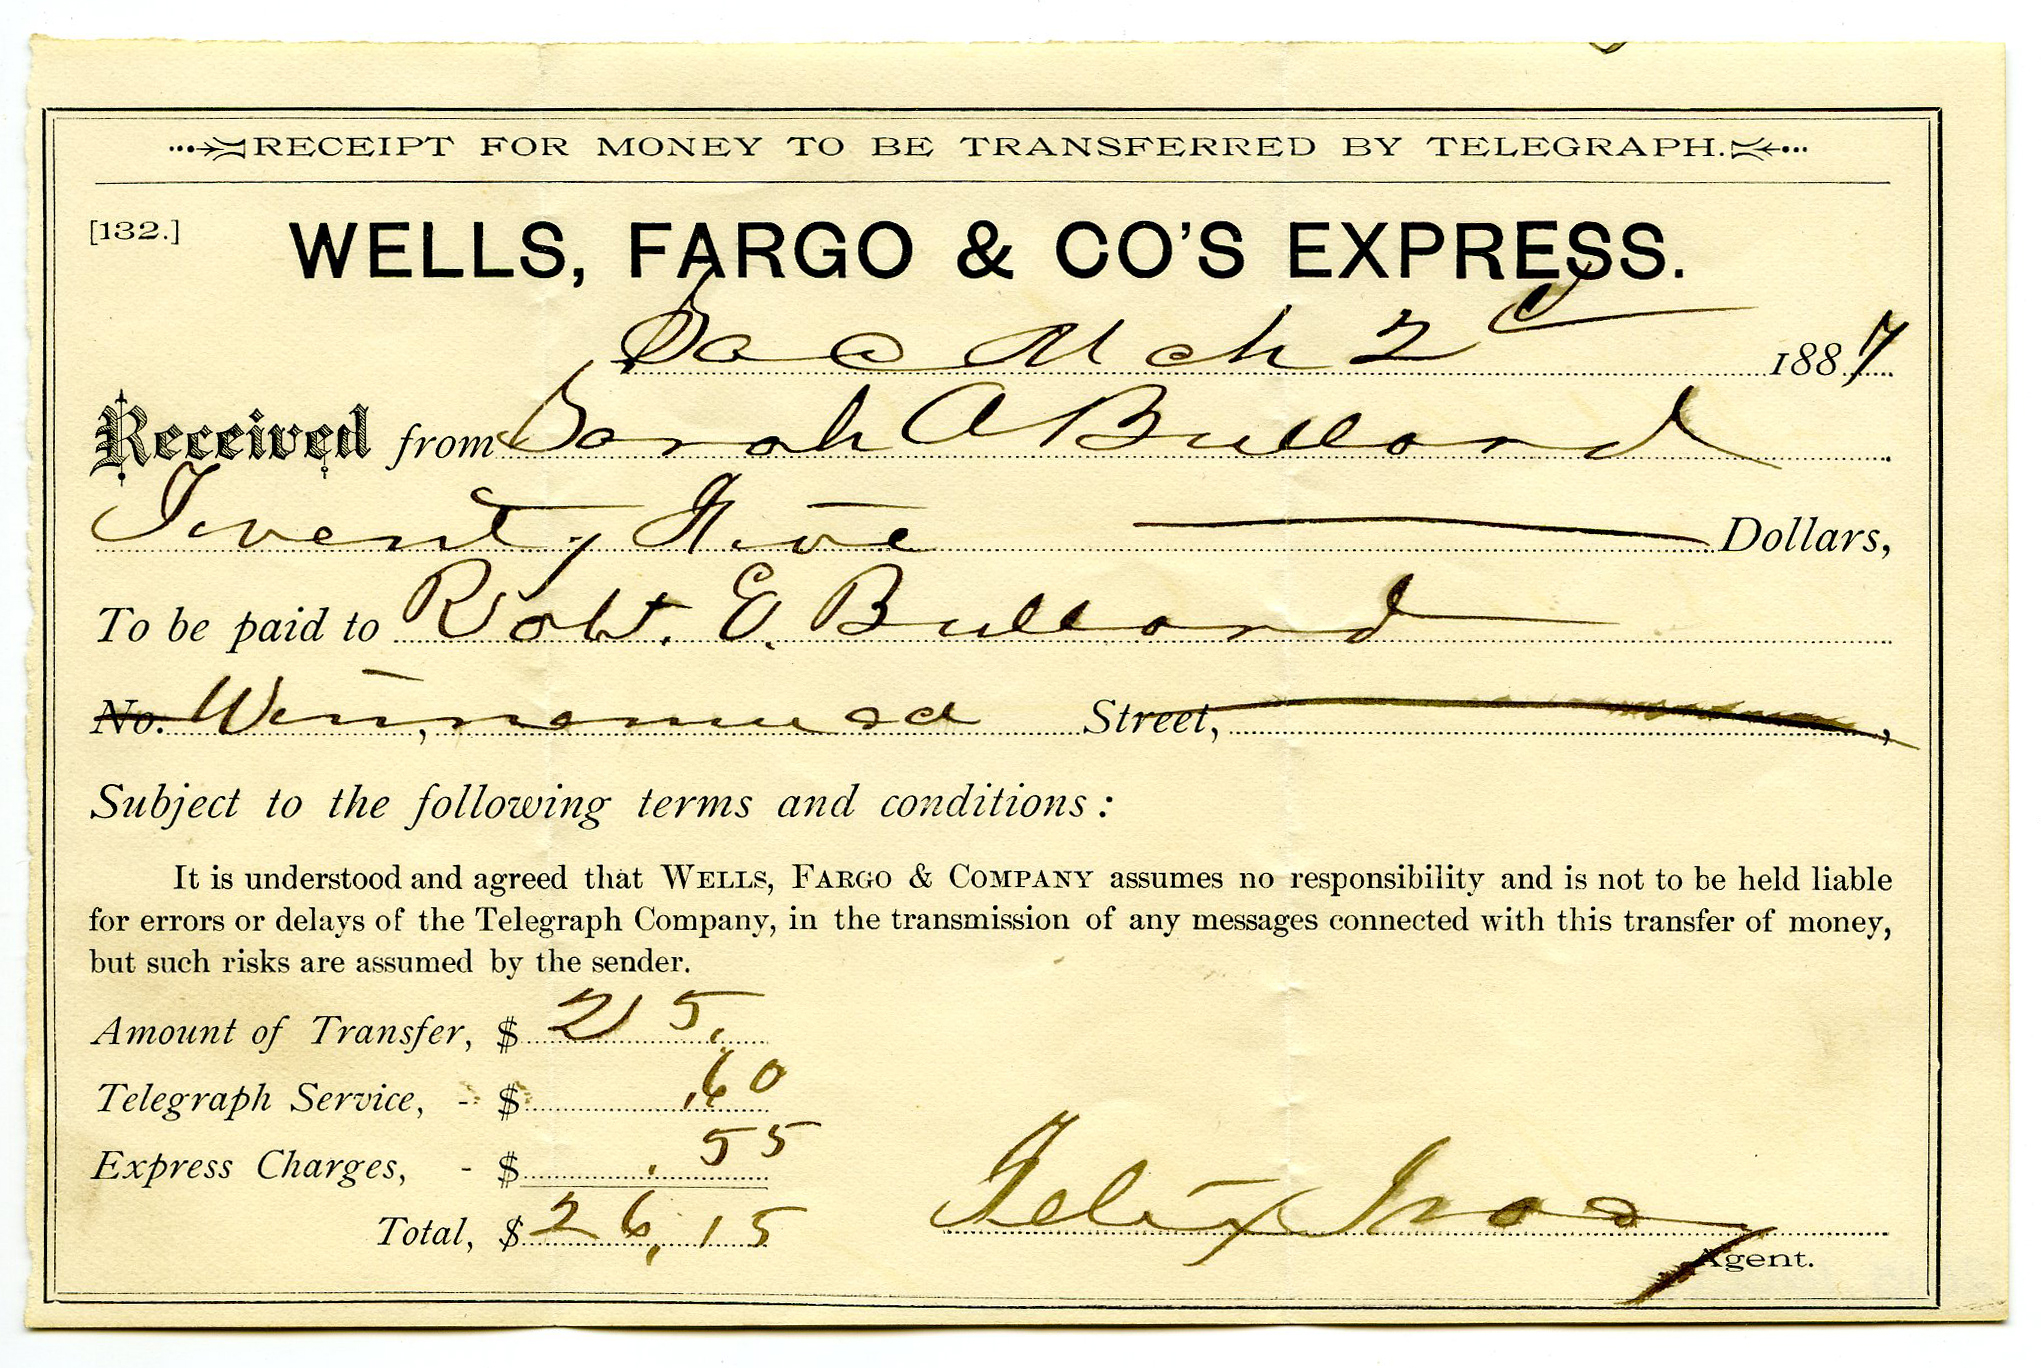 Cream-colored printed form with handwritten directions filled in. Reads: Sac, March 2, 1887. Received from Sarah Bullard. Twenty five dollars. To be paid to Robert E. Bullard. Winnemucca. Charges of 1.15 are added, with a total from Sarah as 26.15.